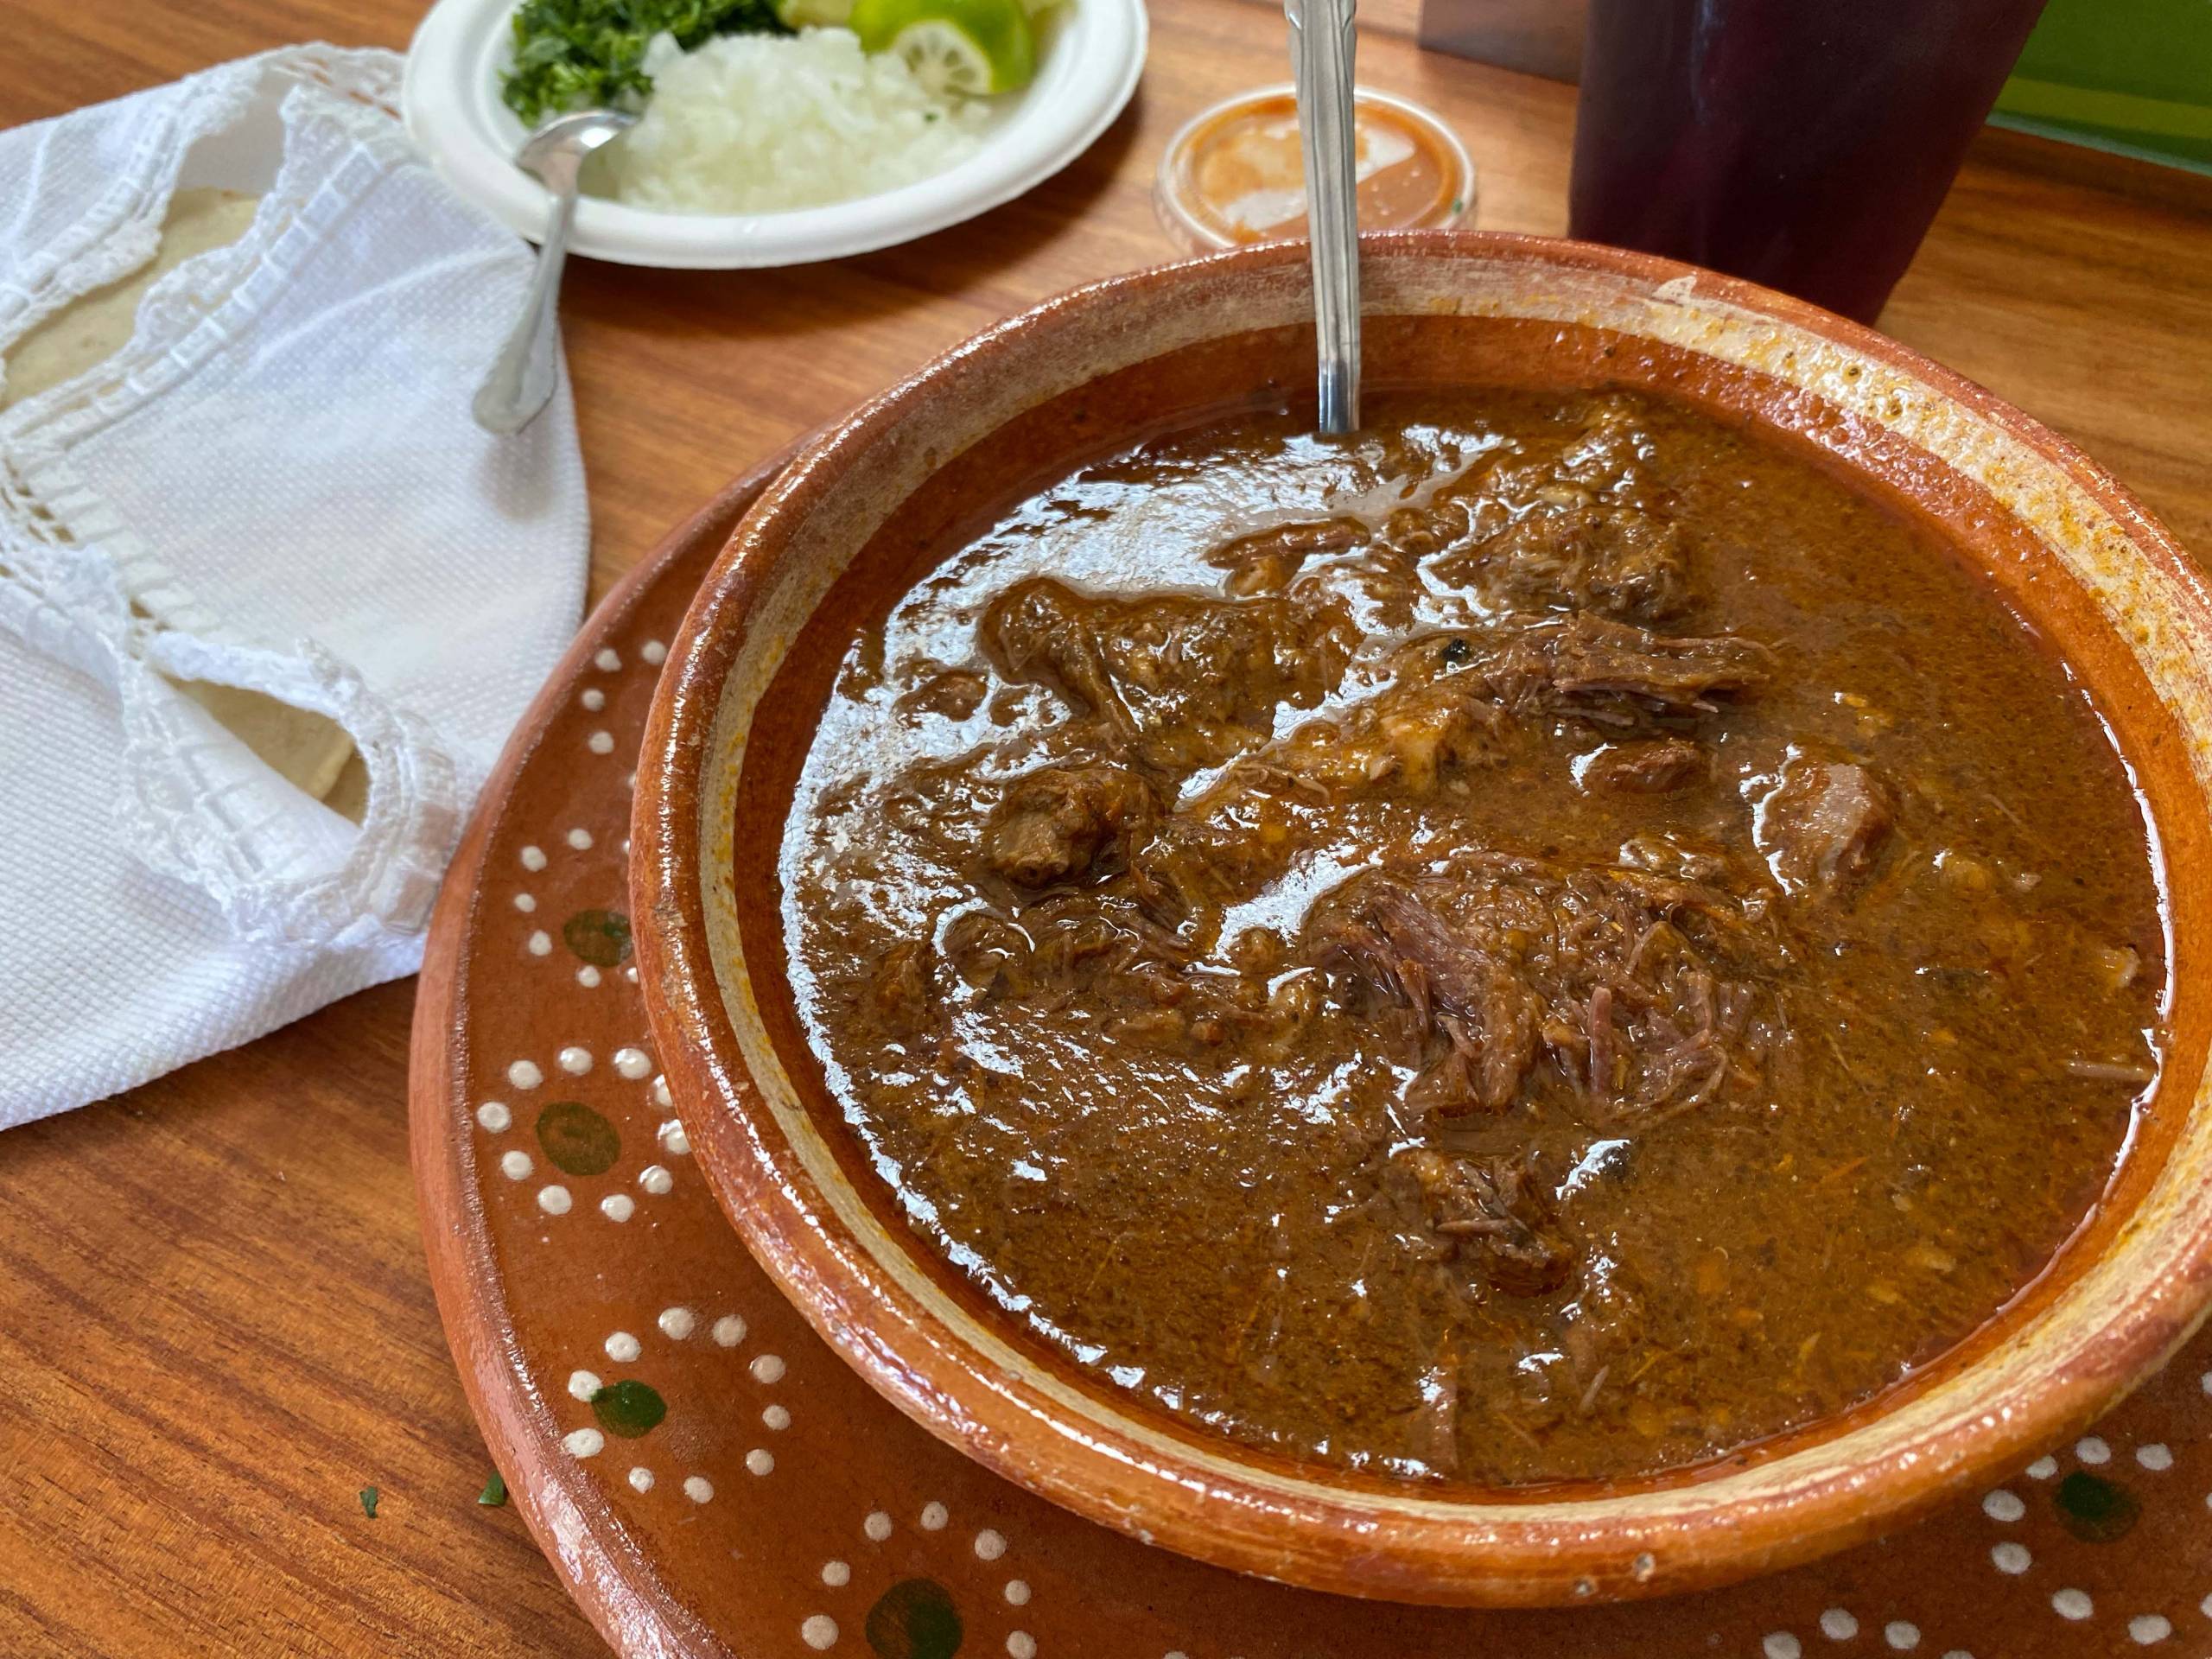 An earthenware bowl of beef barbacoa, with tortillas wrapped in a dish towel on the side.